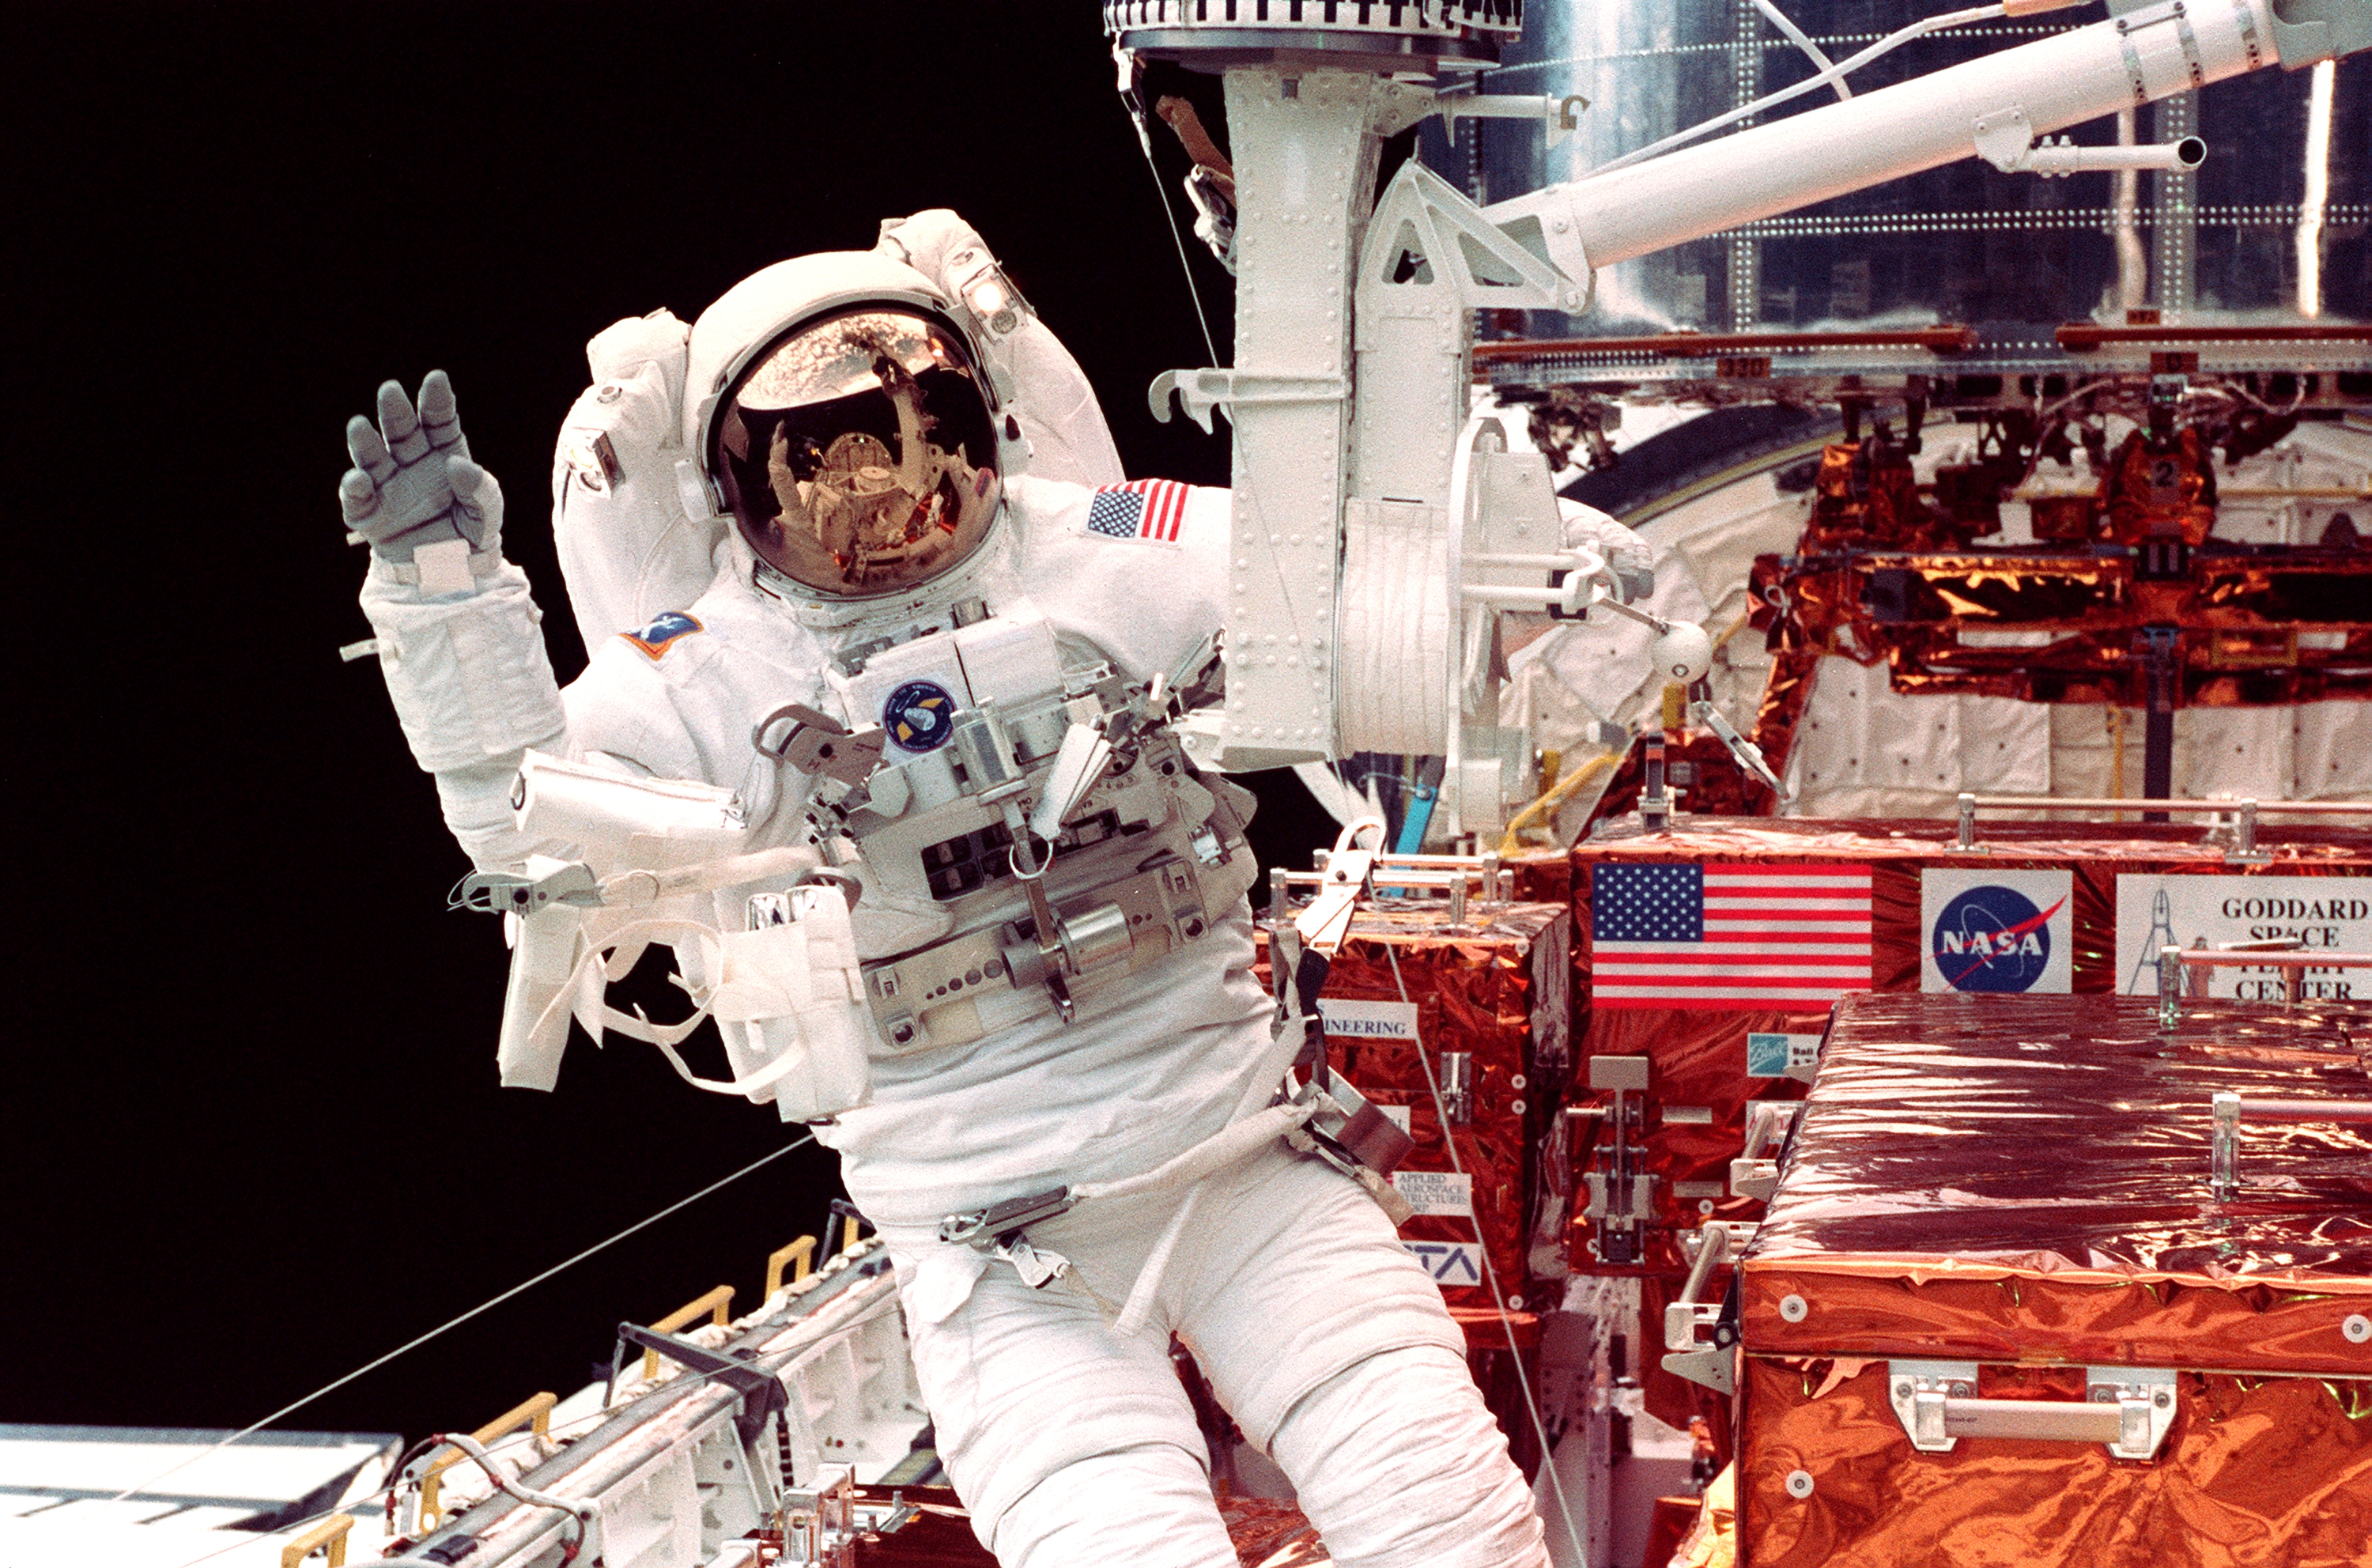 An astronaut waves to the camera in the cargo bay of the space shuttle.